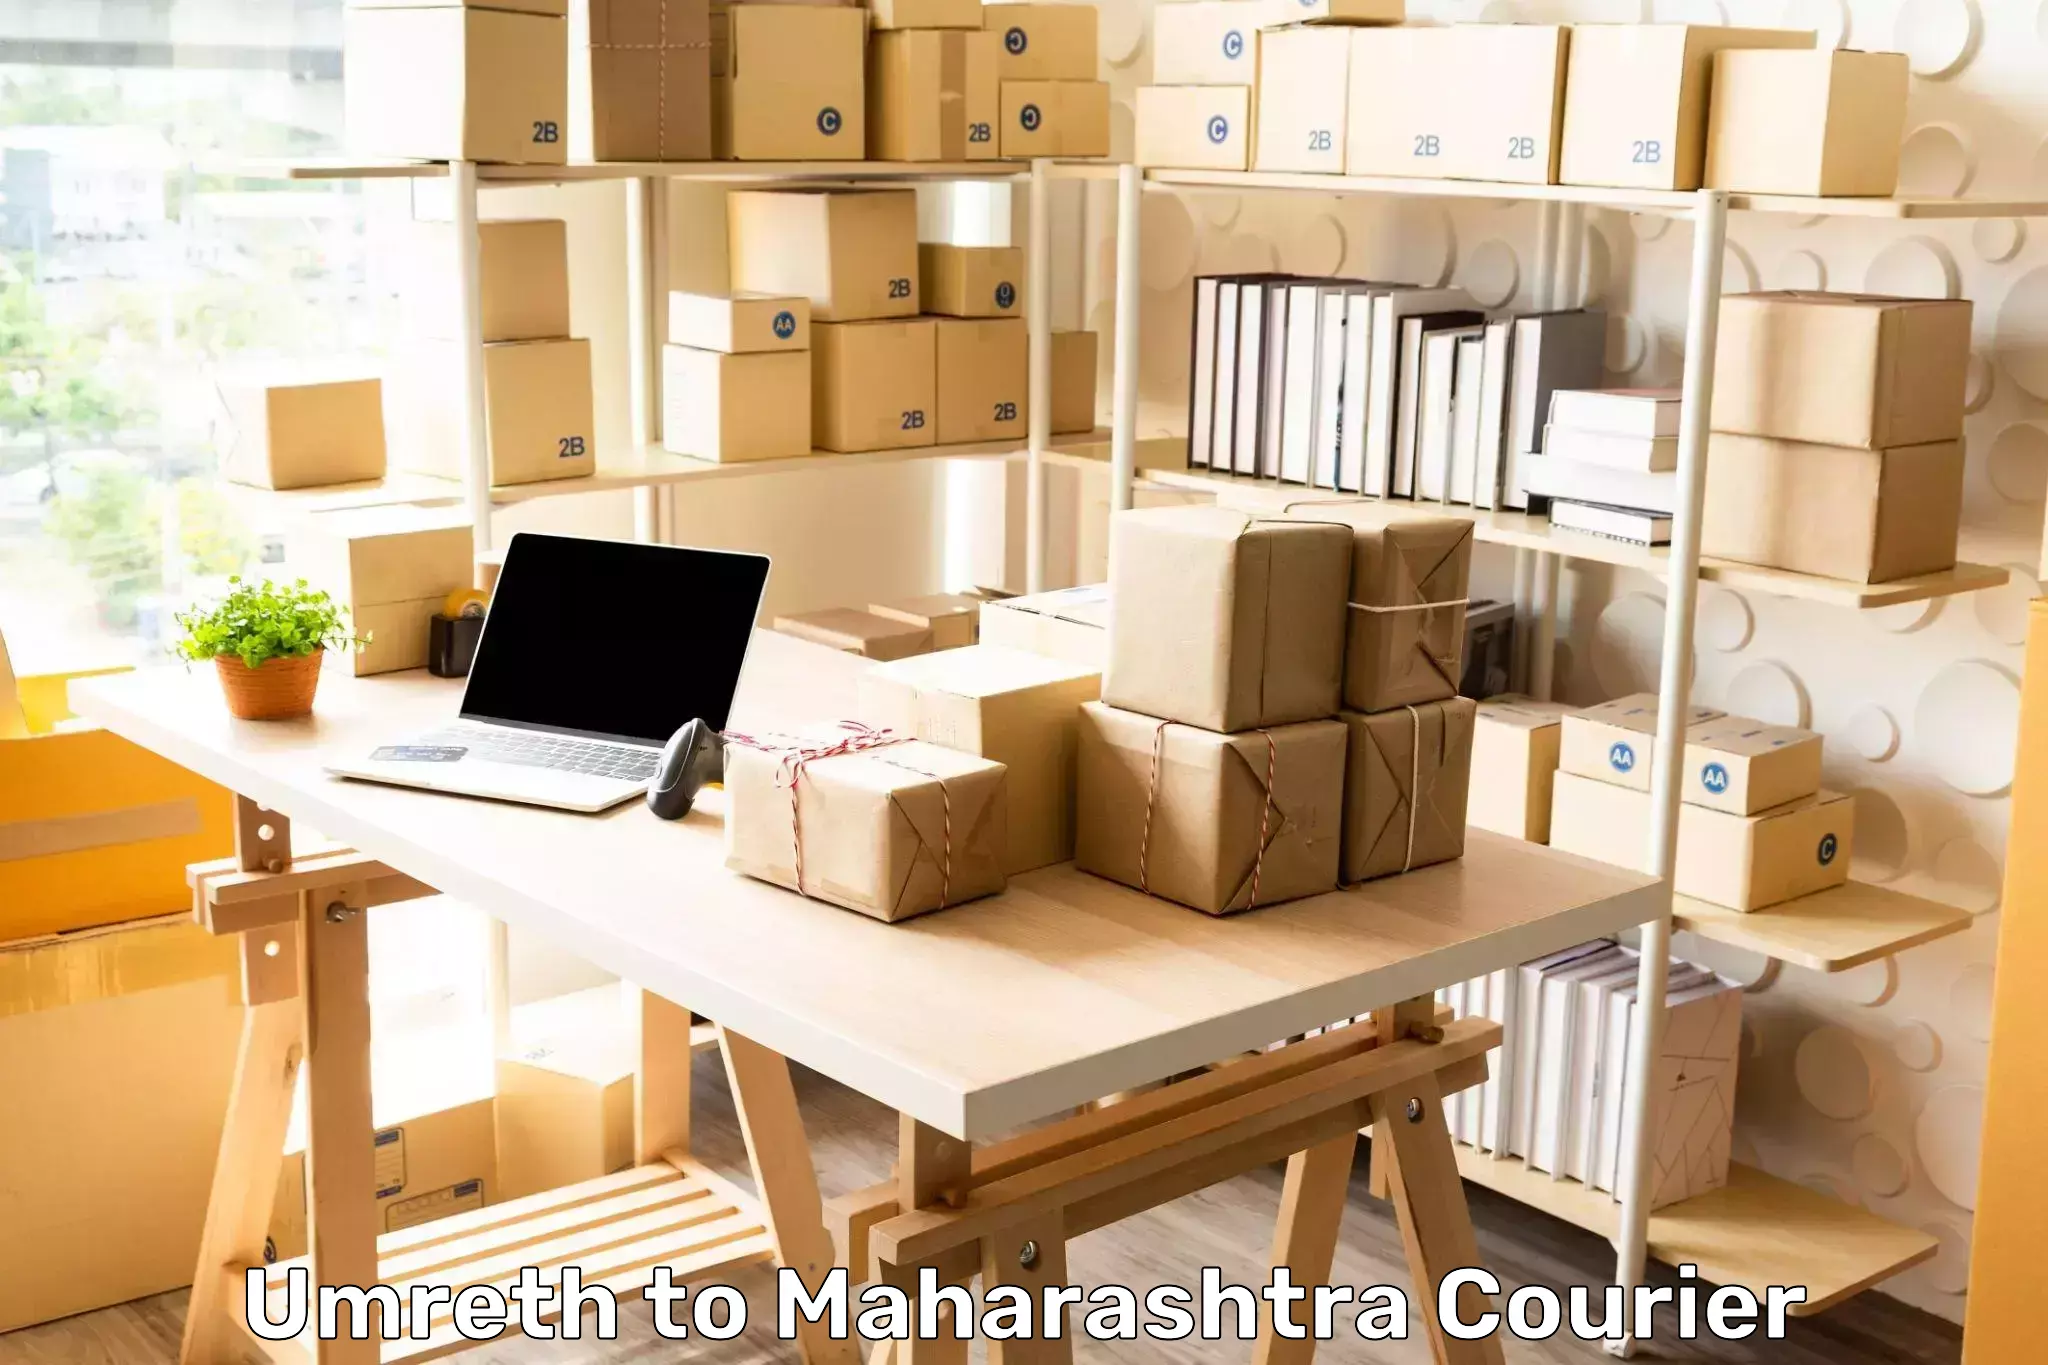 Supply chain delivery Umreth to Tata Institute of Social Sciences Mumbai